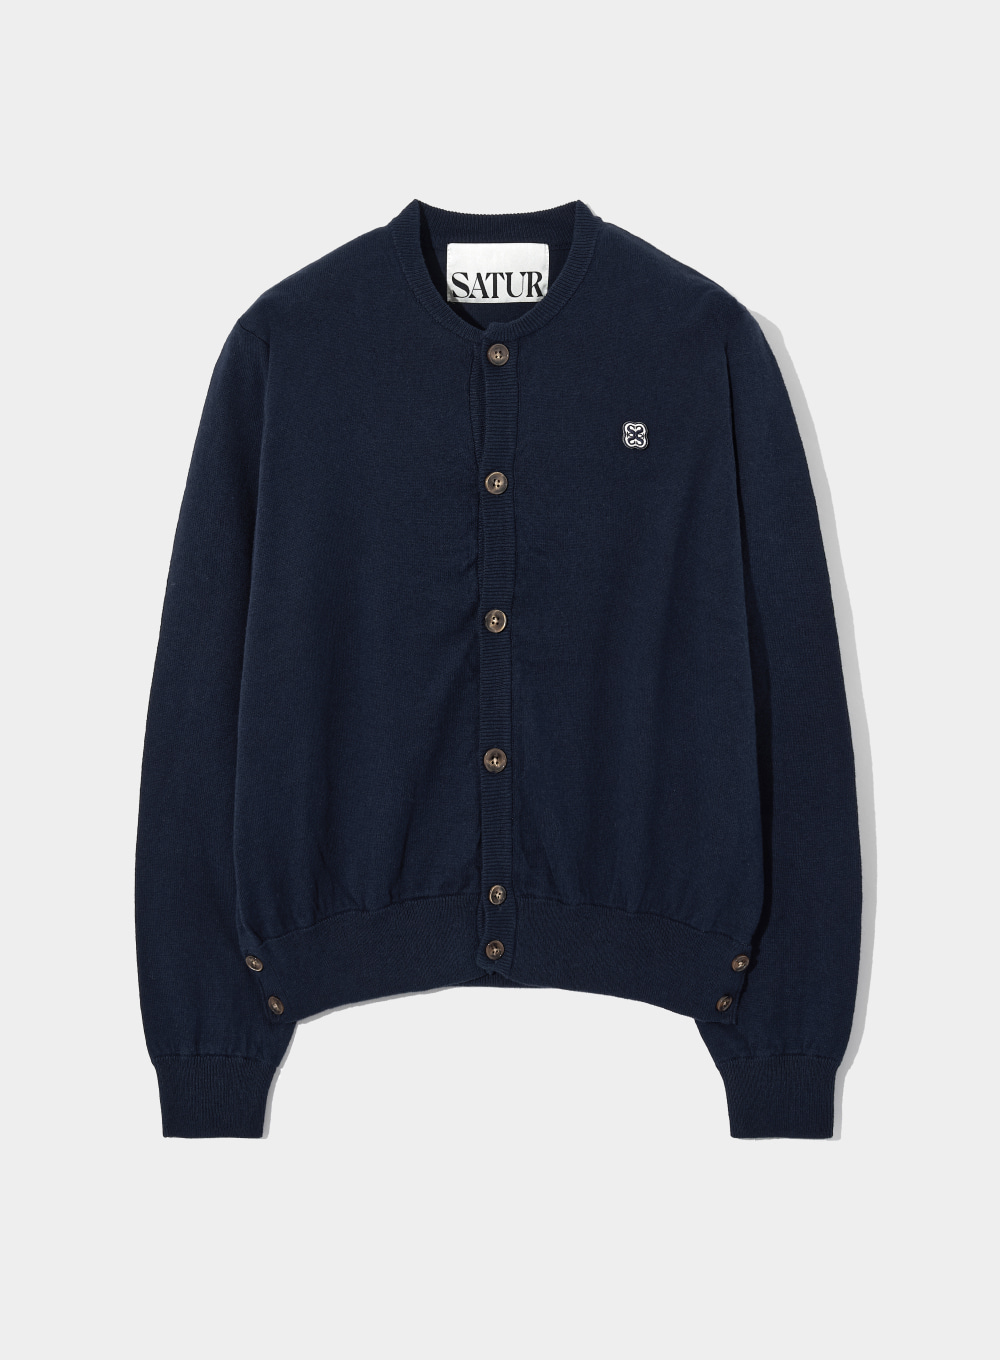 All Day Satur Cotton Cashmere Blend Cardigan - Classic Navy